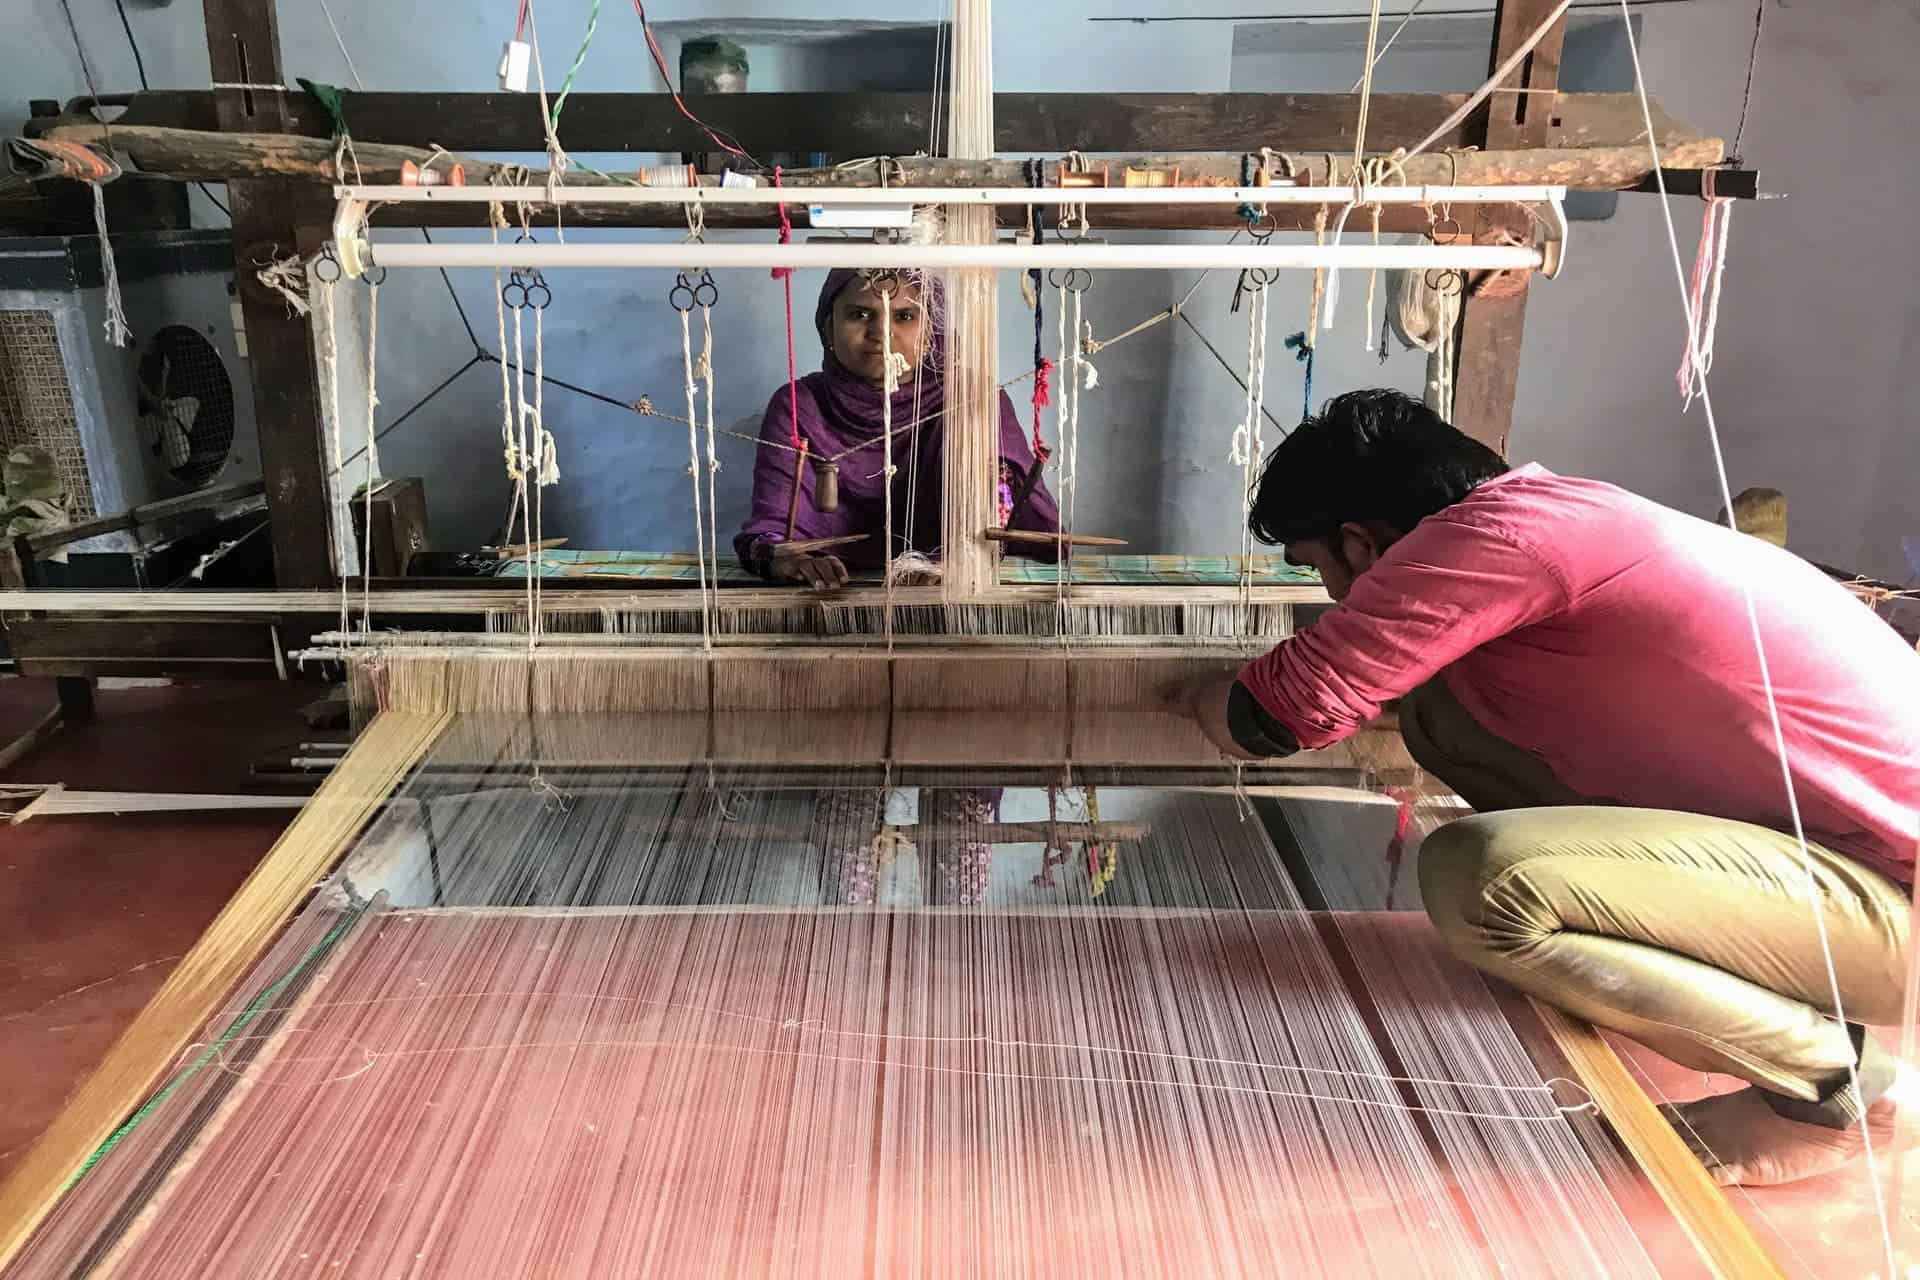 Putting the spotlight on the Weavers